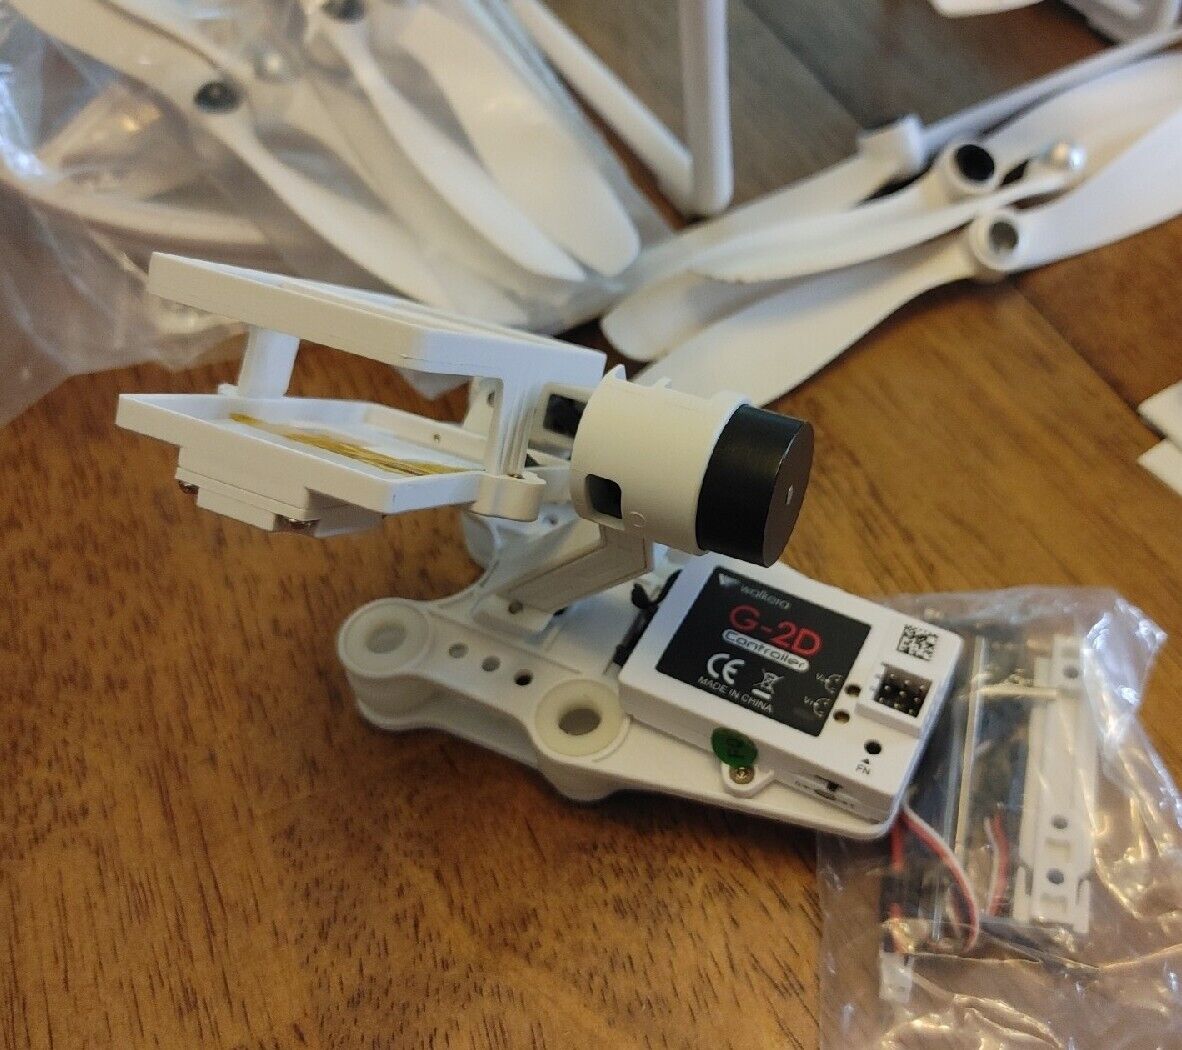 DJI Phantom Drone P330D for parts, As-Is Untested Gimbal, Charger Extras | Inox Wind